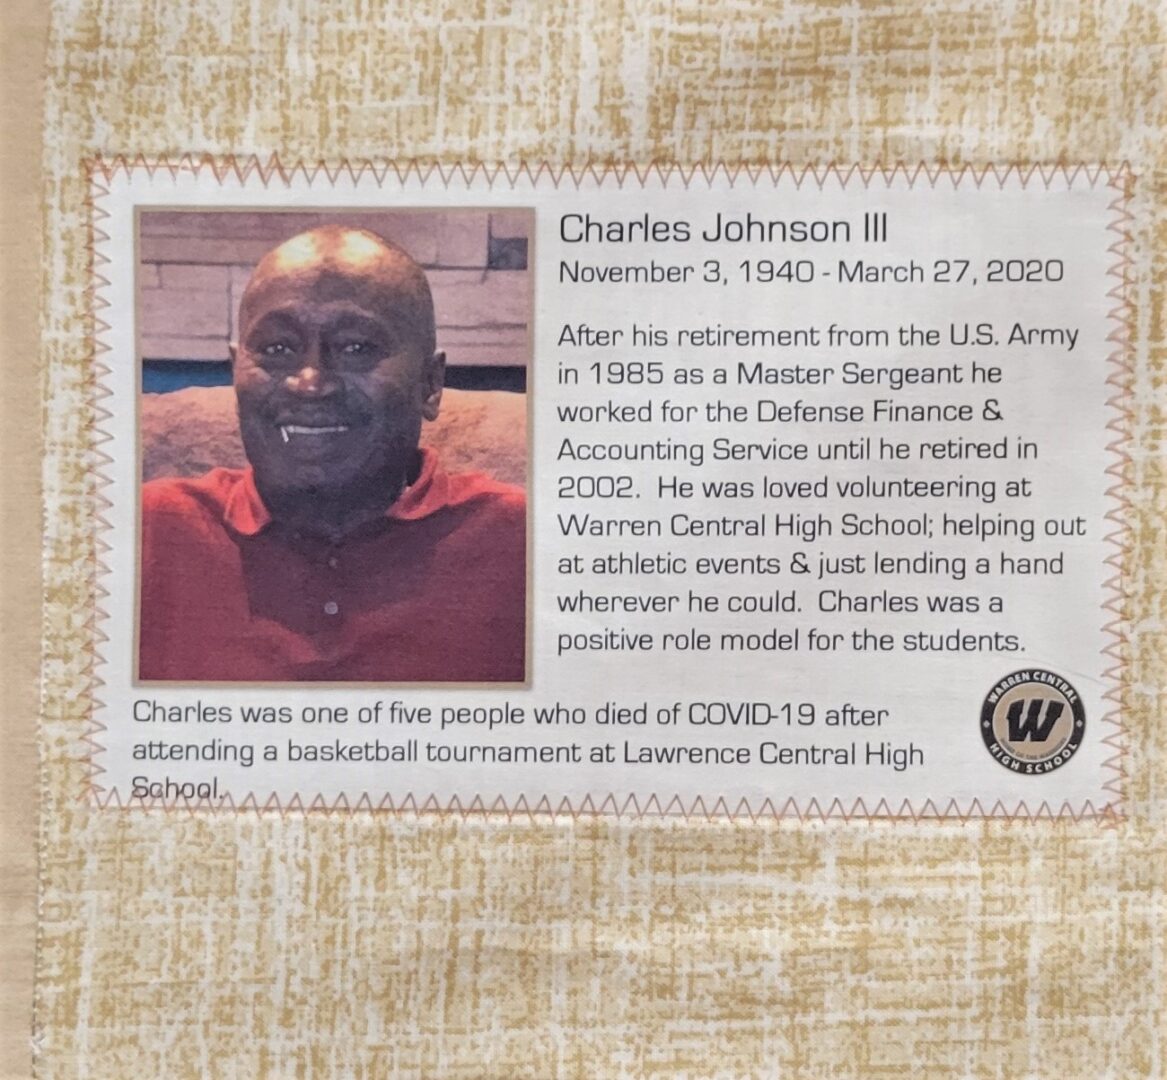 IN MEMORY OF CHARLES JOHNSON III - NOVEMBER 3, 1940 - MARCH 27, 2020